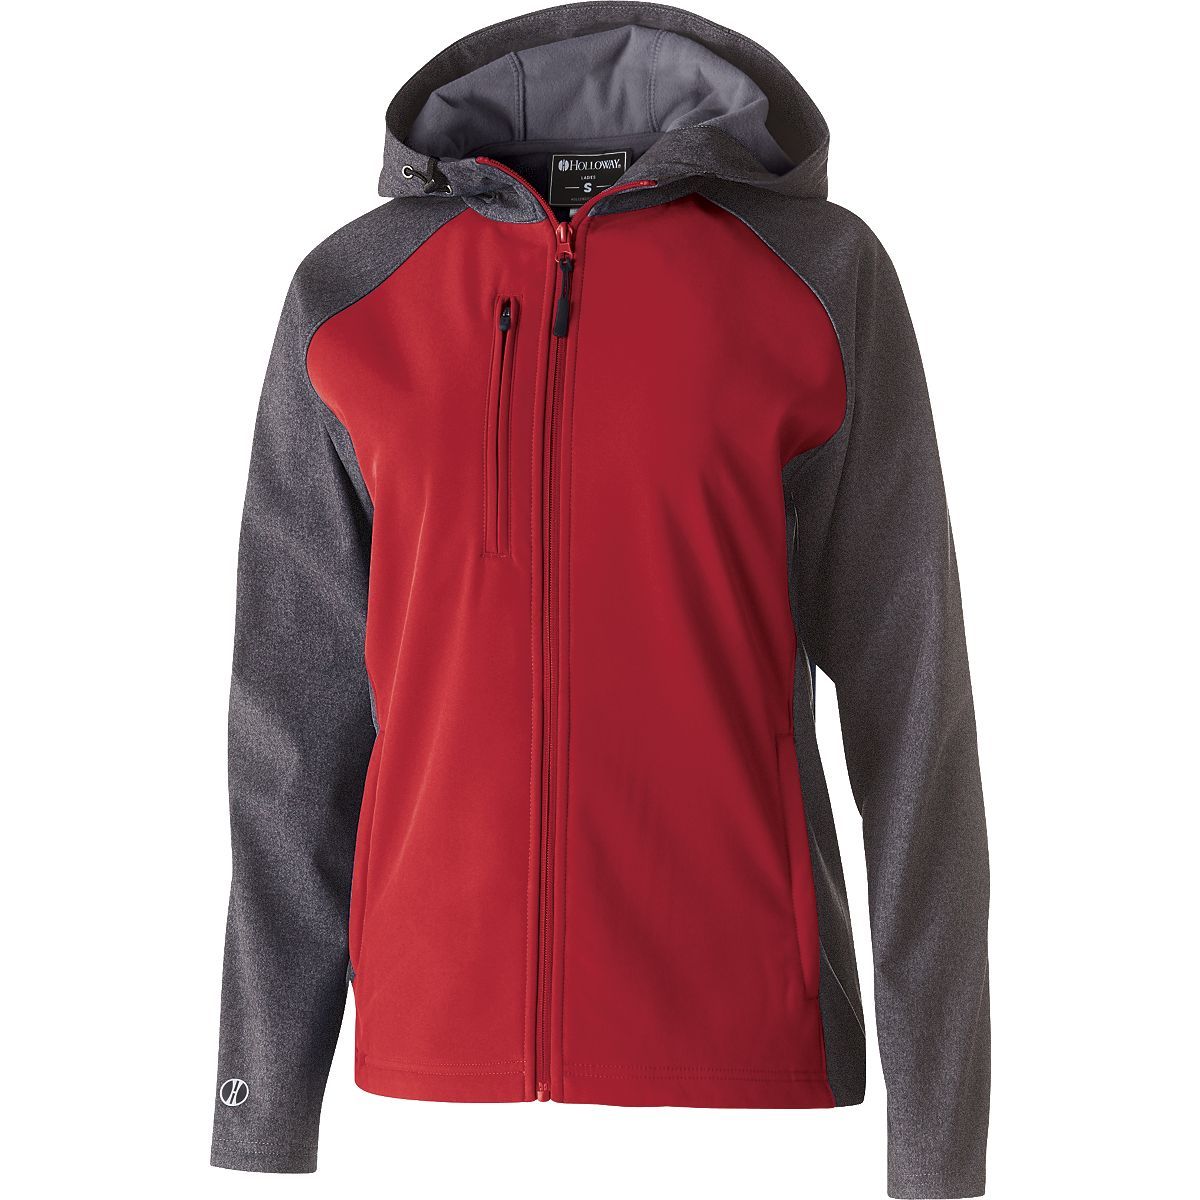 Holloway Ladies Raider Softshell Jacket in Carbon Print/Scarlet  -Part of the Ladies, Ladies-Jacket, Holloway, Outerwear product lines at KanaleyCreations.com